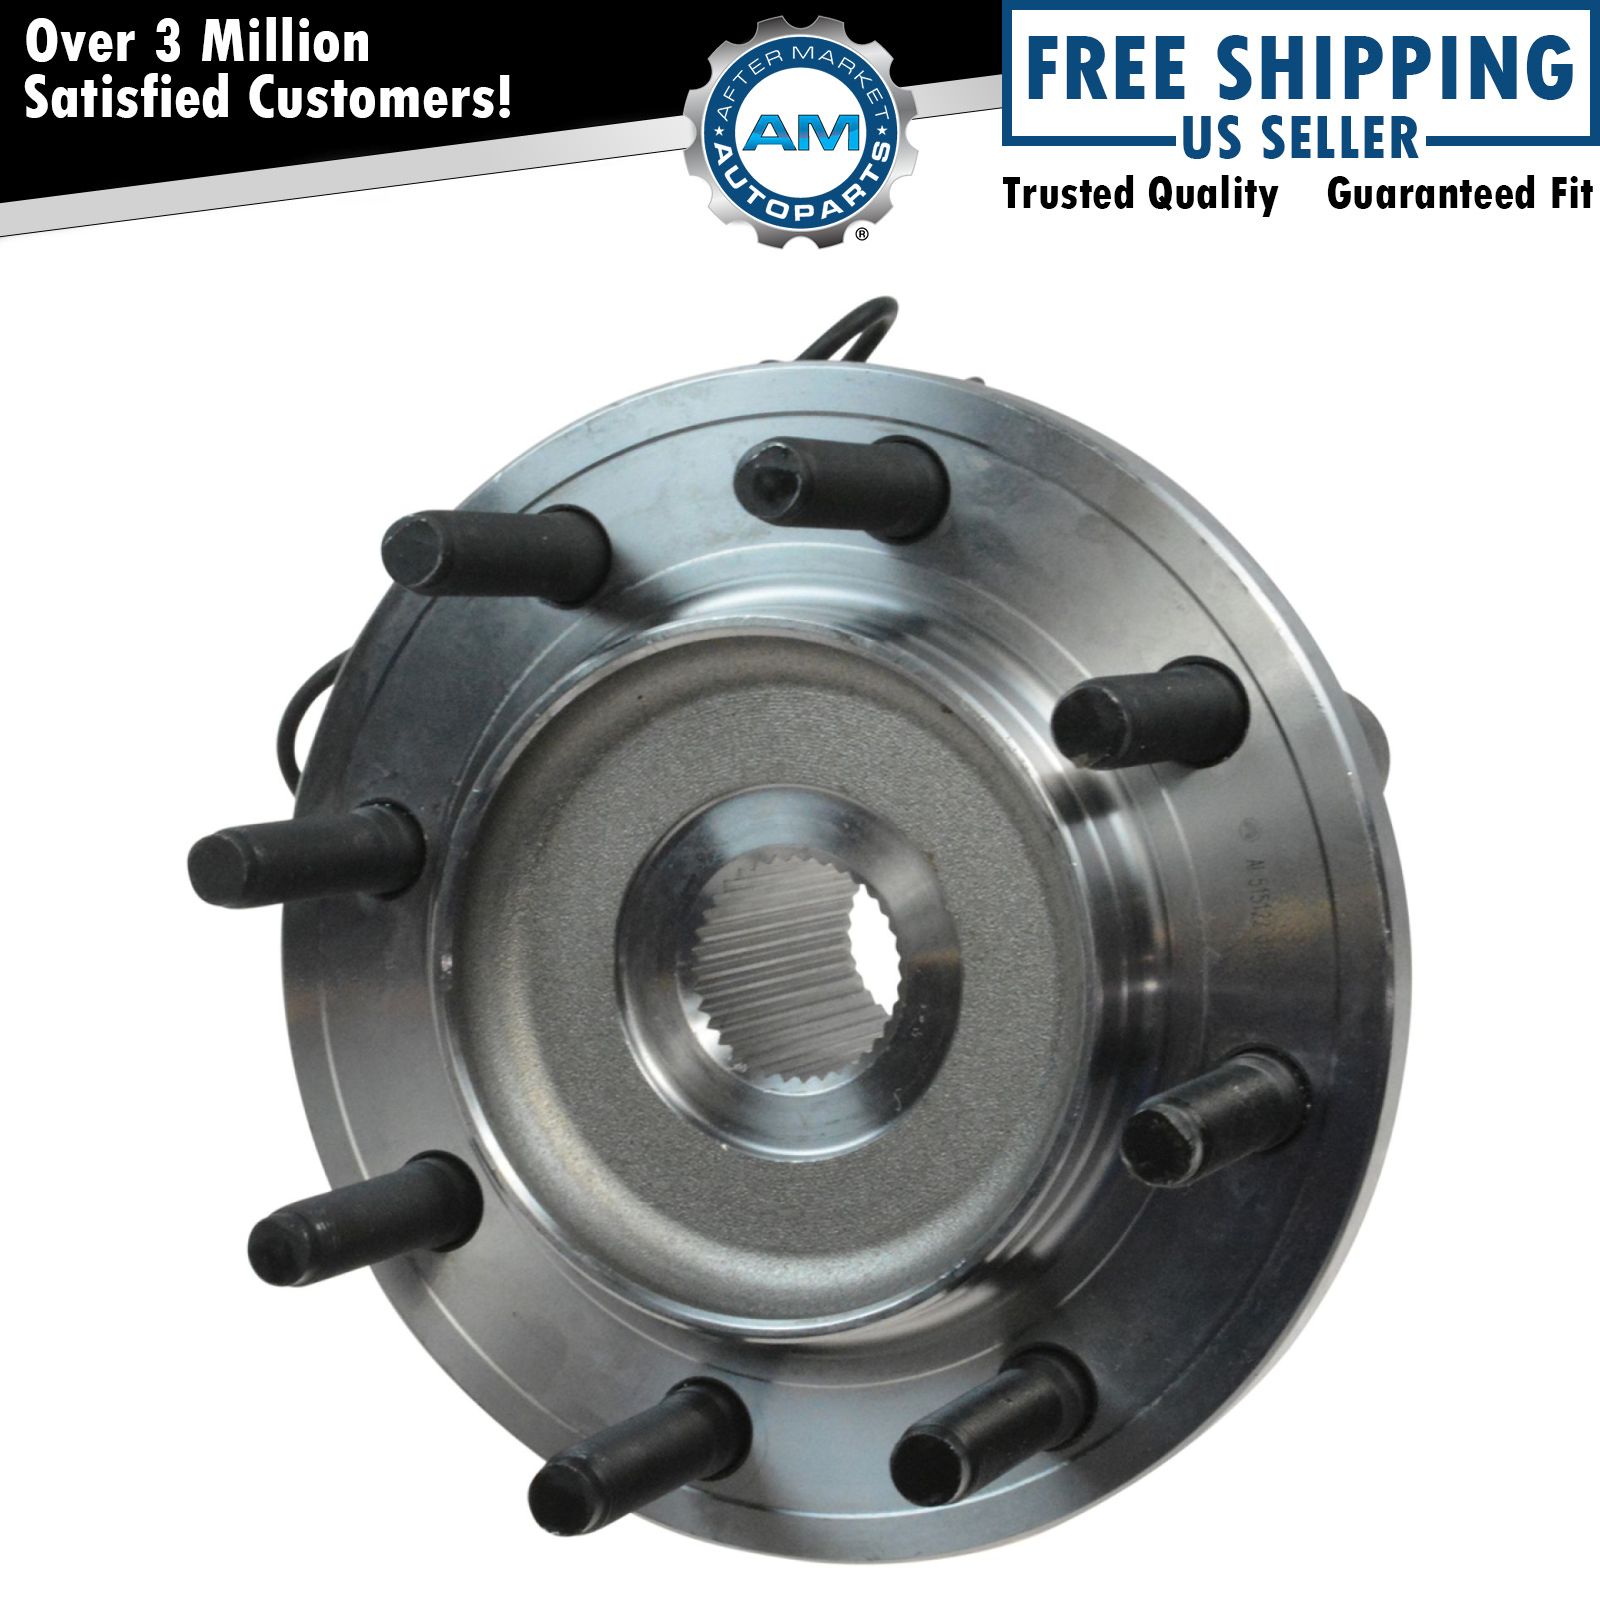 2009 2010 2011 Dodge Ram 2500 3500 New Front Wheel Bearing & Hub for 4x4 w/ ABS